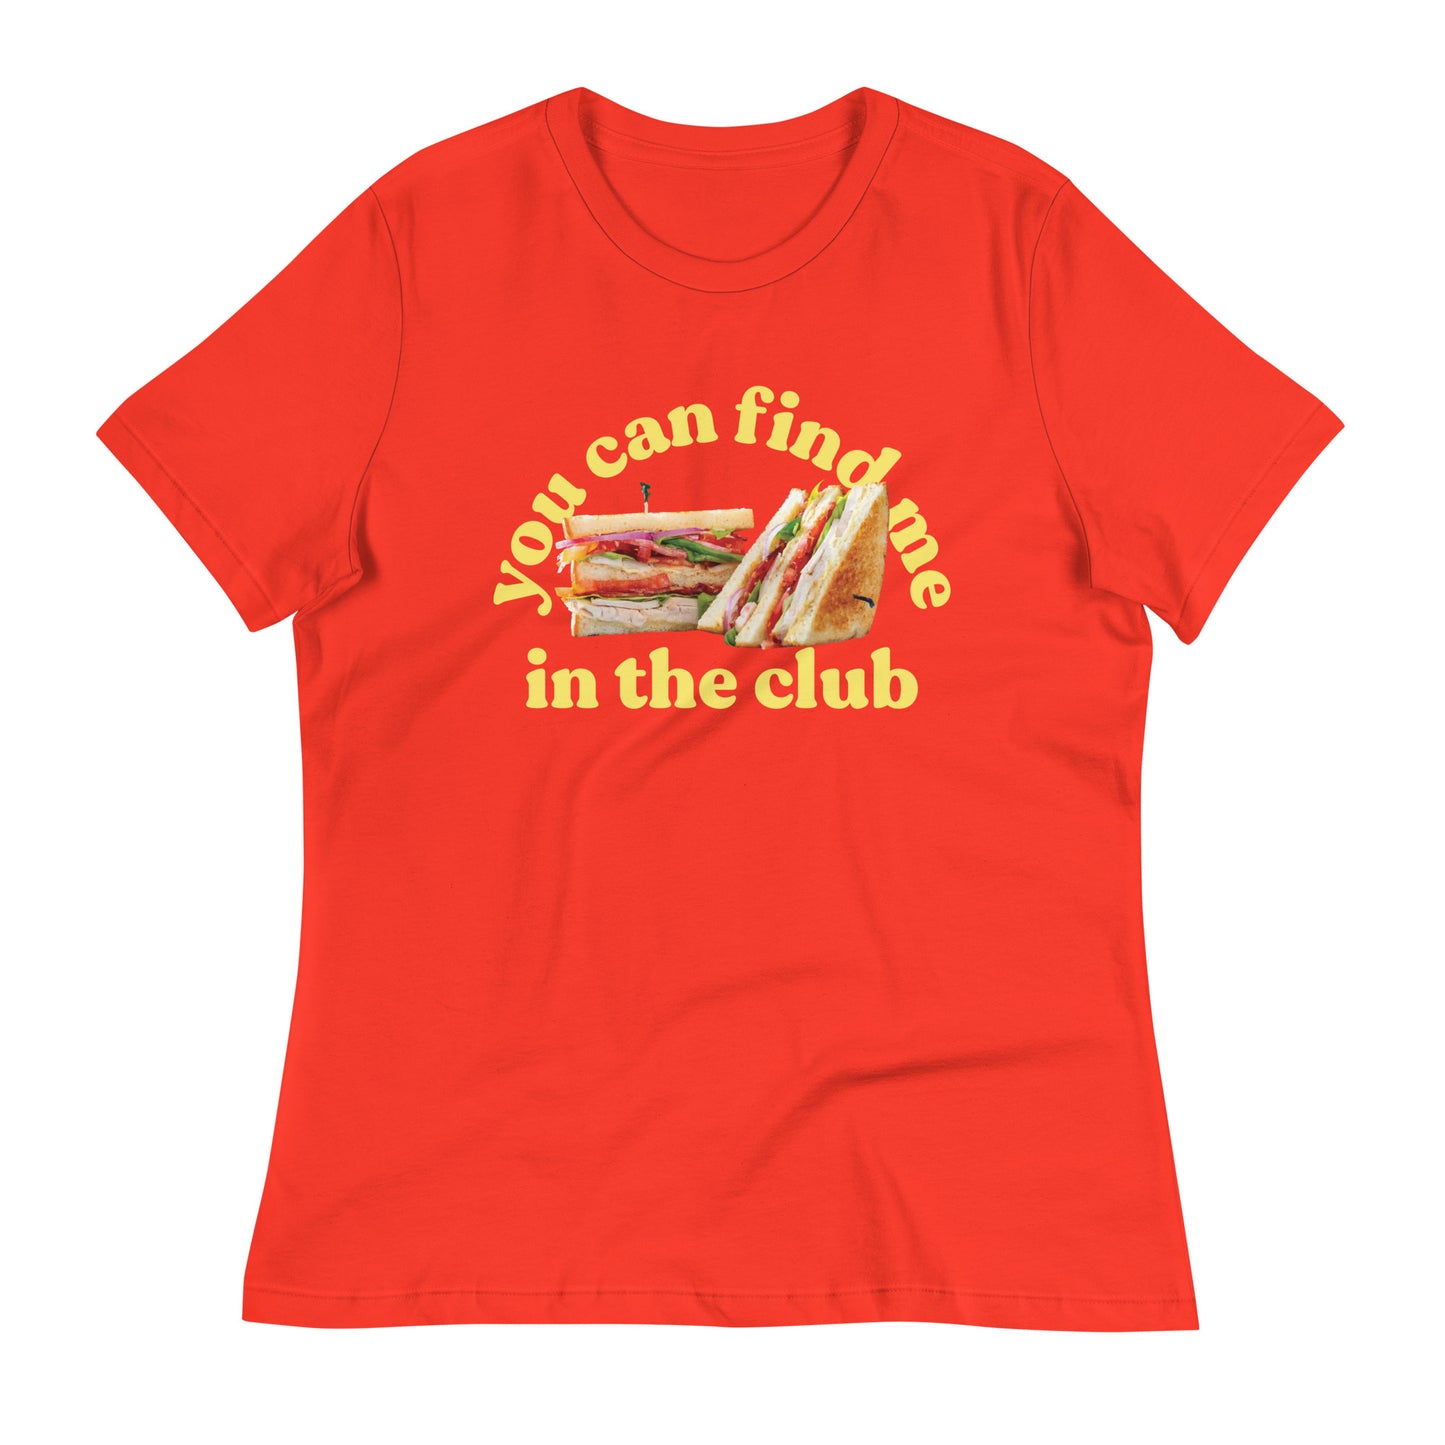 You Can Find Me In The Club Women's Signature Tee